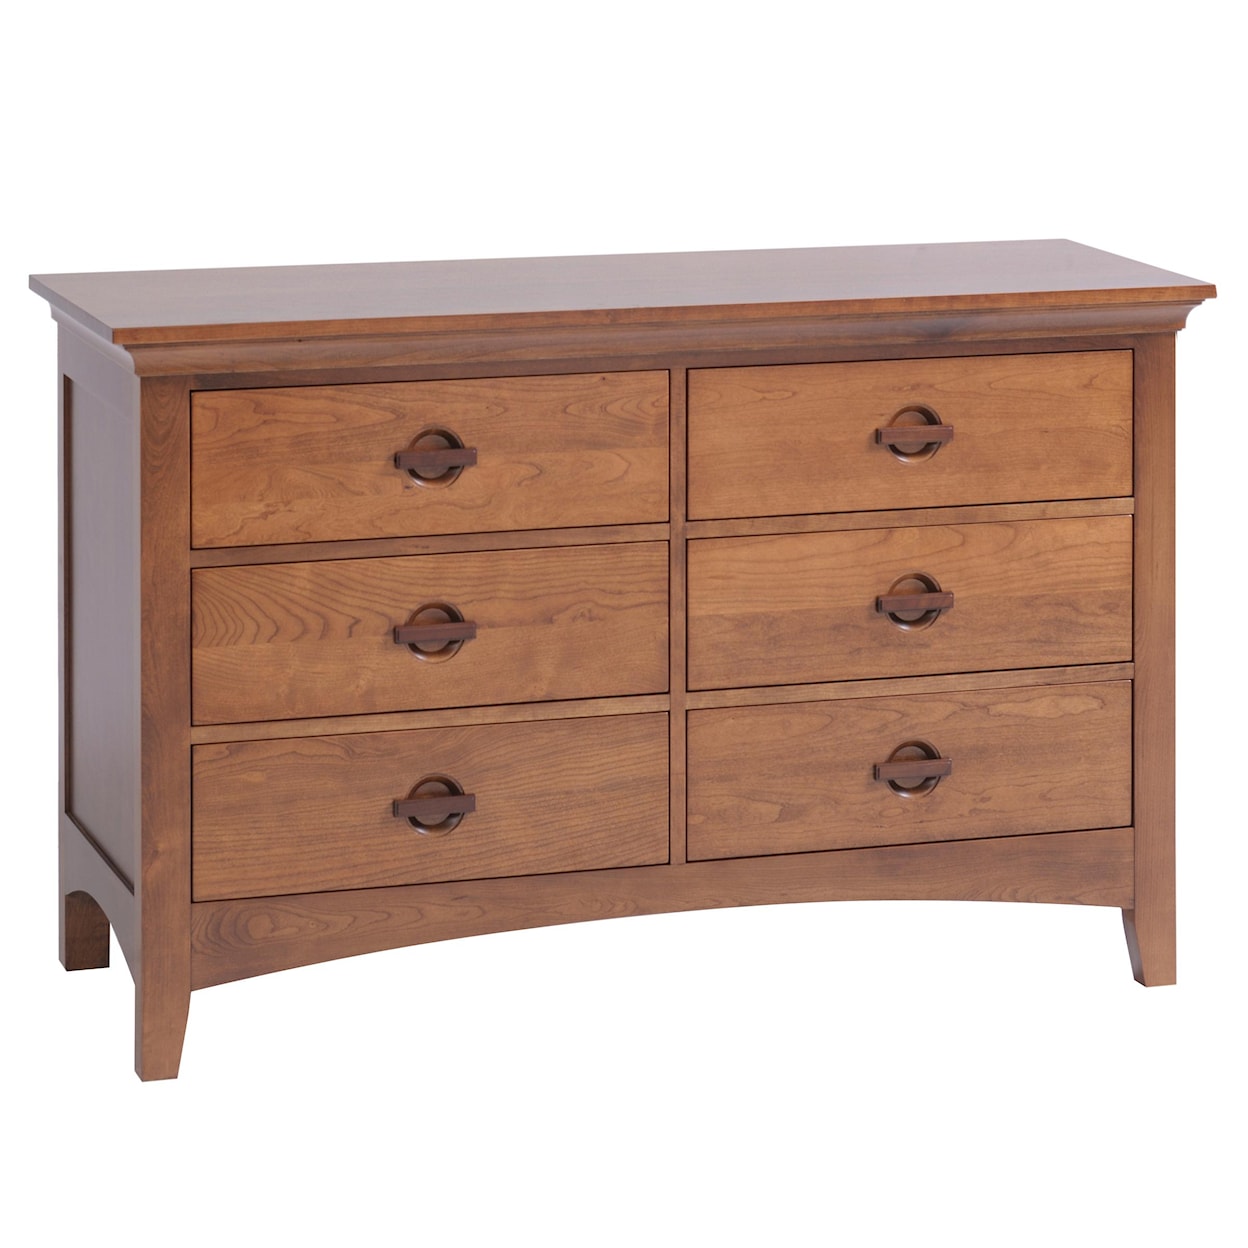 Country View Woodworking Great Lakes Small Dresser/Armoire Base